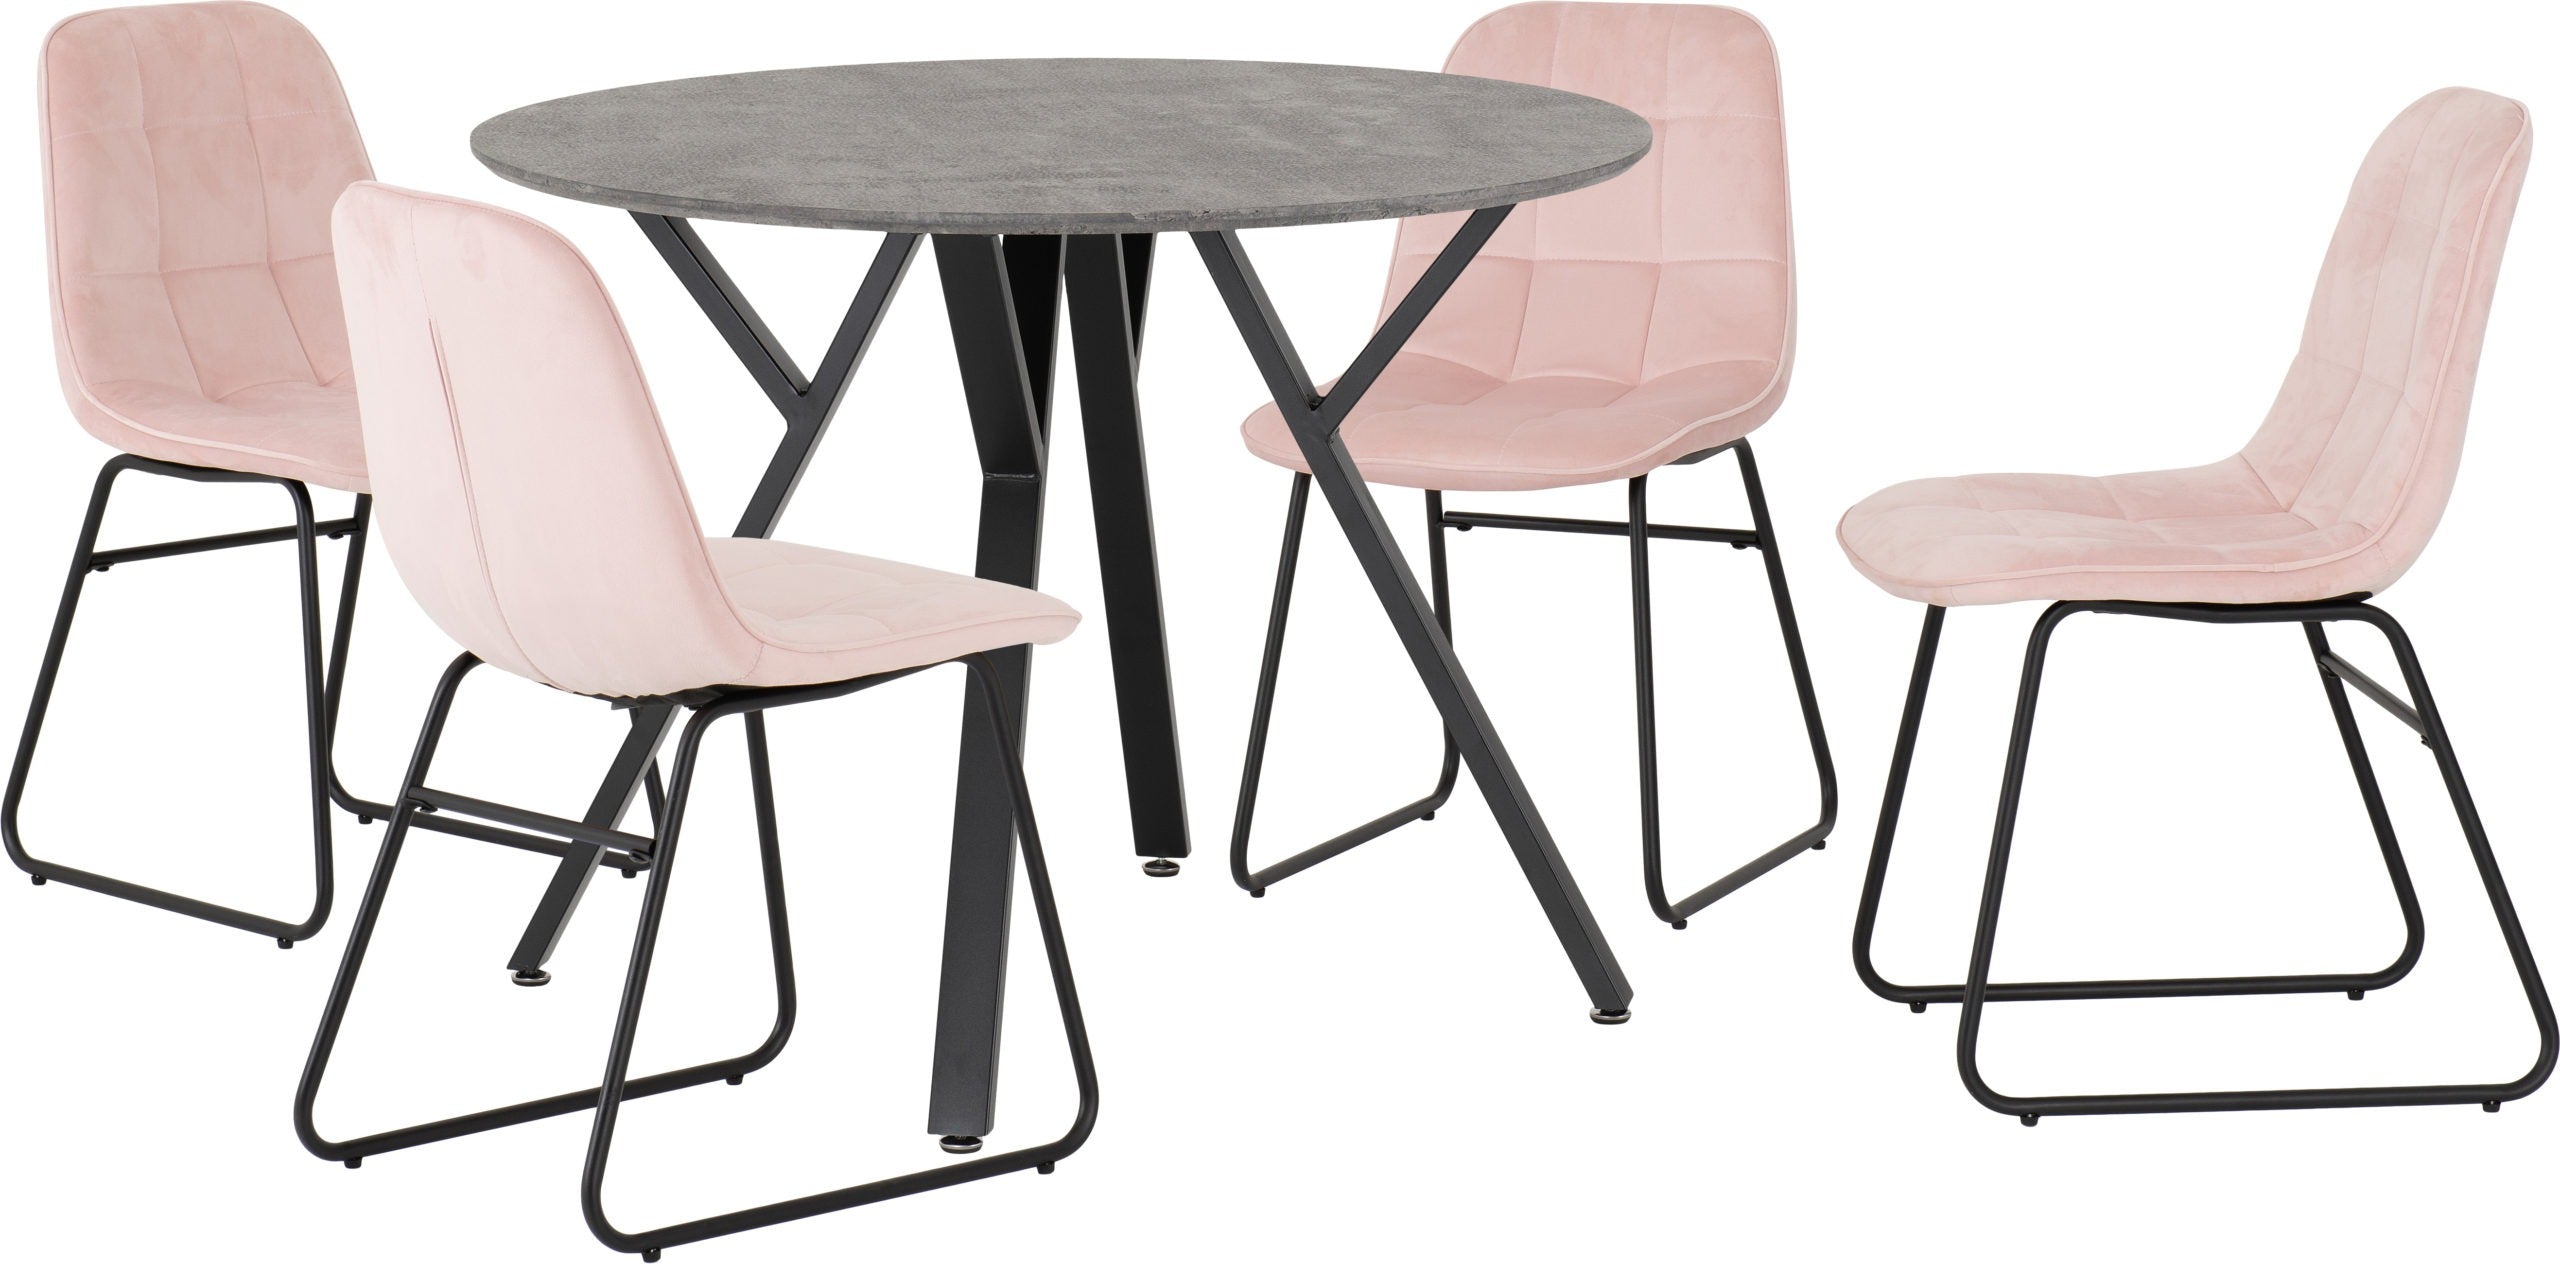 Athens Round Dining Set with Lukas Chairs Concrete Effect/Black/Baby Pink Velvet